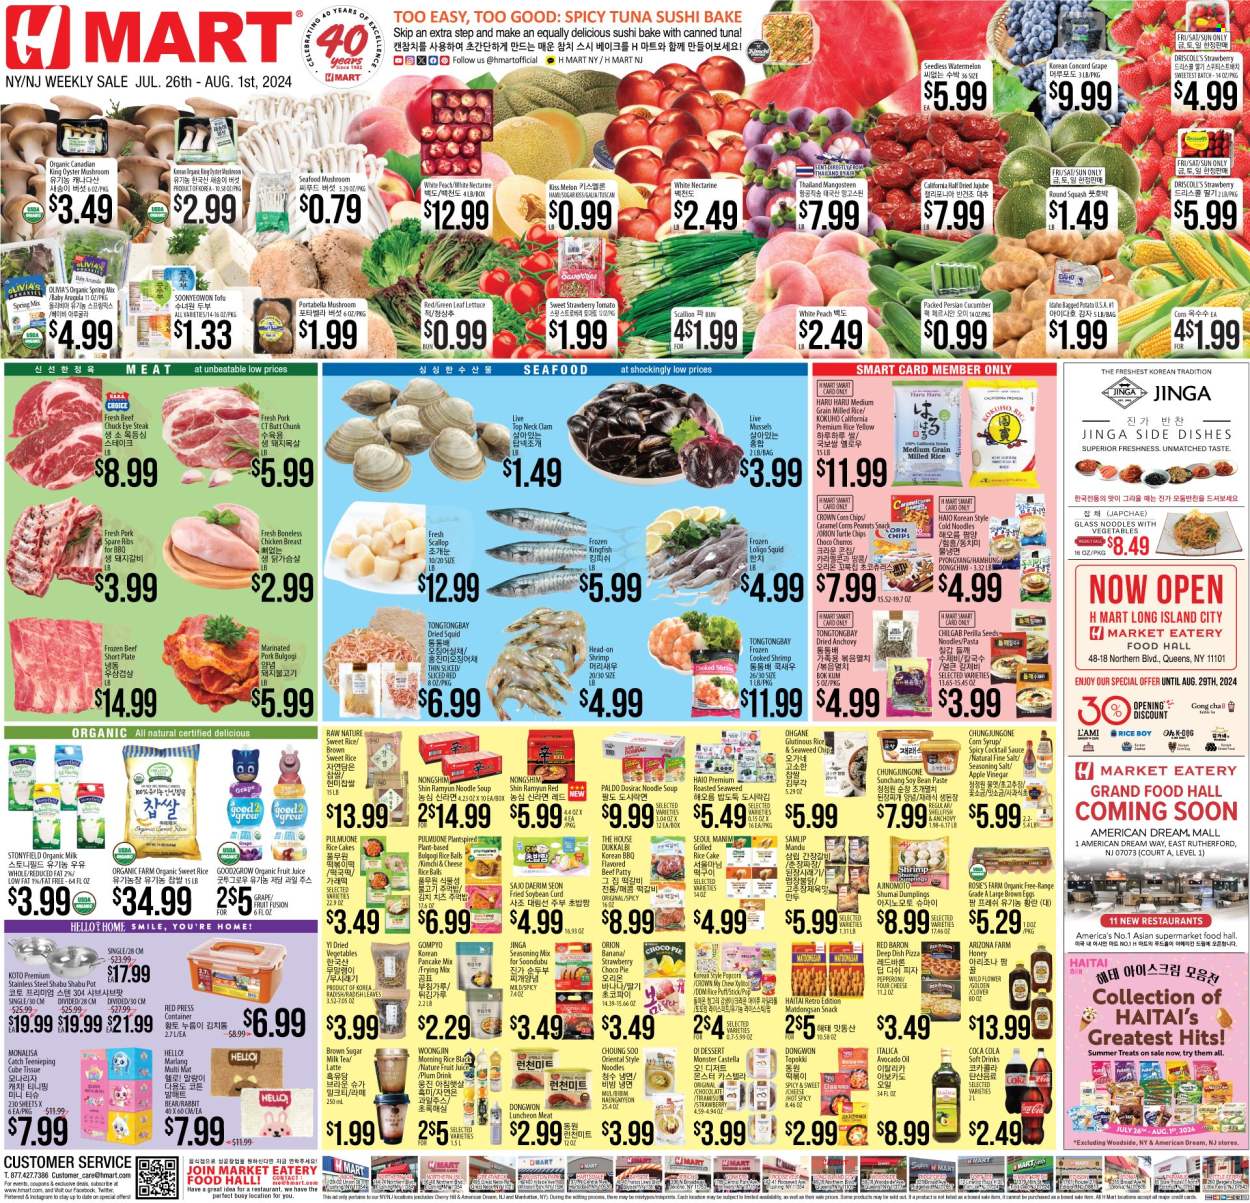 thumbnail - Hmart Flyer - 07/26/2024 - 08/01/2024 - Sales products - portobello mushrooms, oyster mushrooms, king oyster mushrooms, pie, tiramisu, churros, dessert, rice cakes, pancake mix, arugula, beans, cucumber, radishes, salad greens, lettuce, nectarines, watermelon, jujube, melons, clams, mussels, scallops, squid, tuna, seafood, king fish, shrimps, sushi, pizza, soup, pasta, dumplings, noodles cup, Shabu, noodles, chicken breasts, lunch meat, anchovies, curd, tofu, organic milk, milk tea, eggs, large eggs, shumai, rice balls, Red Baron, rabbit, corn chips, popcorn, cane sugar, sugar, seaweed, soy bean paste, canned tuna, kimchi, soybeans, spice, seasoning, caramel, cocktail sauce, avocado oil, corn syrup, honey, syrup, peanuts, Coca-Cola, juice, fruit juice, soft drink, AriZona, Coke, carbonated soft drink, steak, chuck steak, pork meat, pork ribs, pork spare ribs, marinated pork, tissues, plate. Page 1.